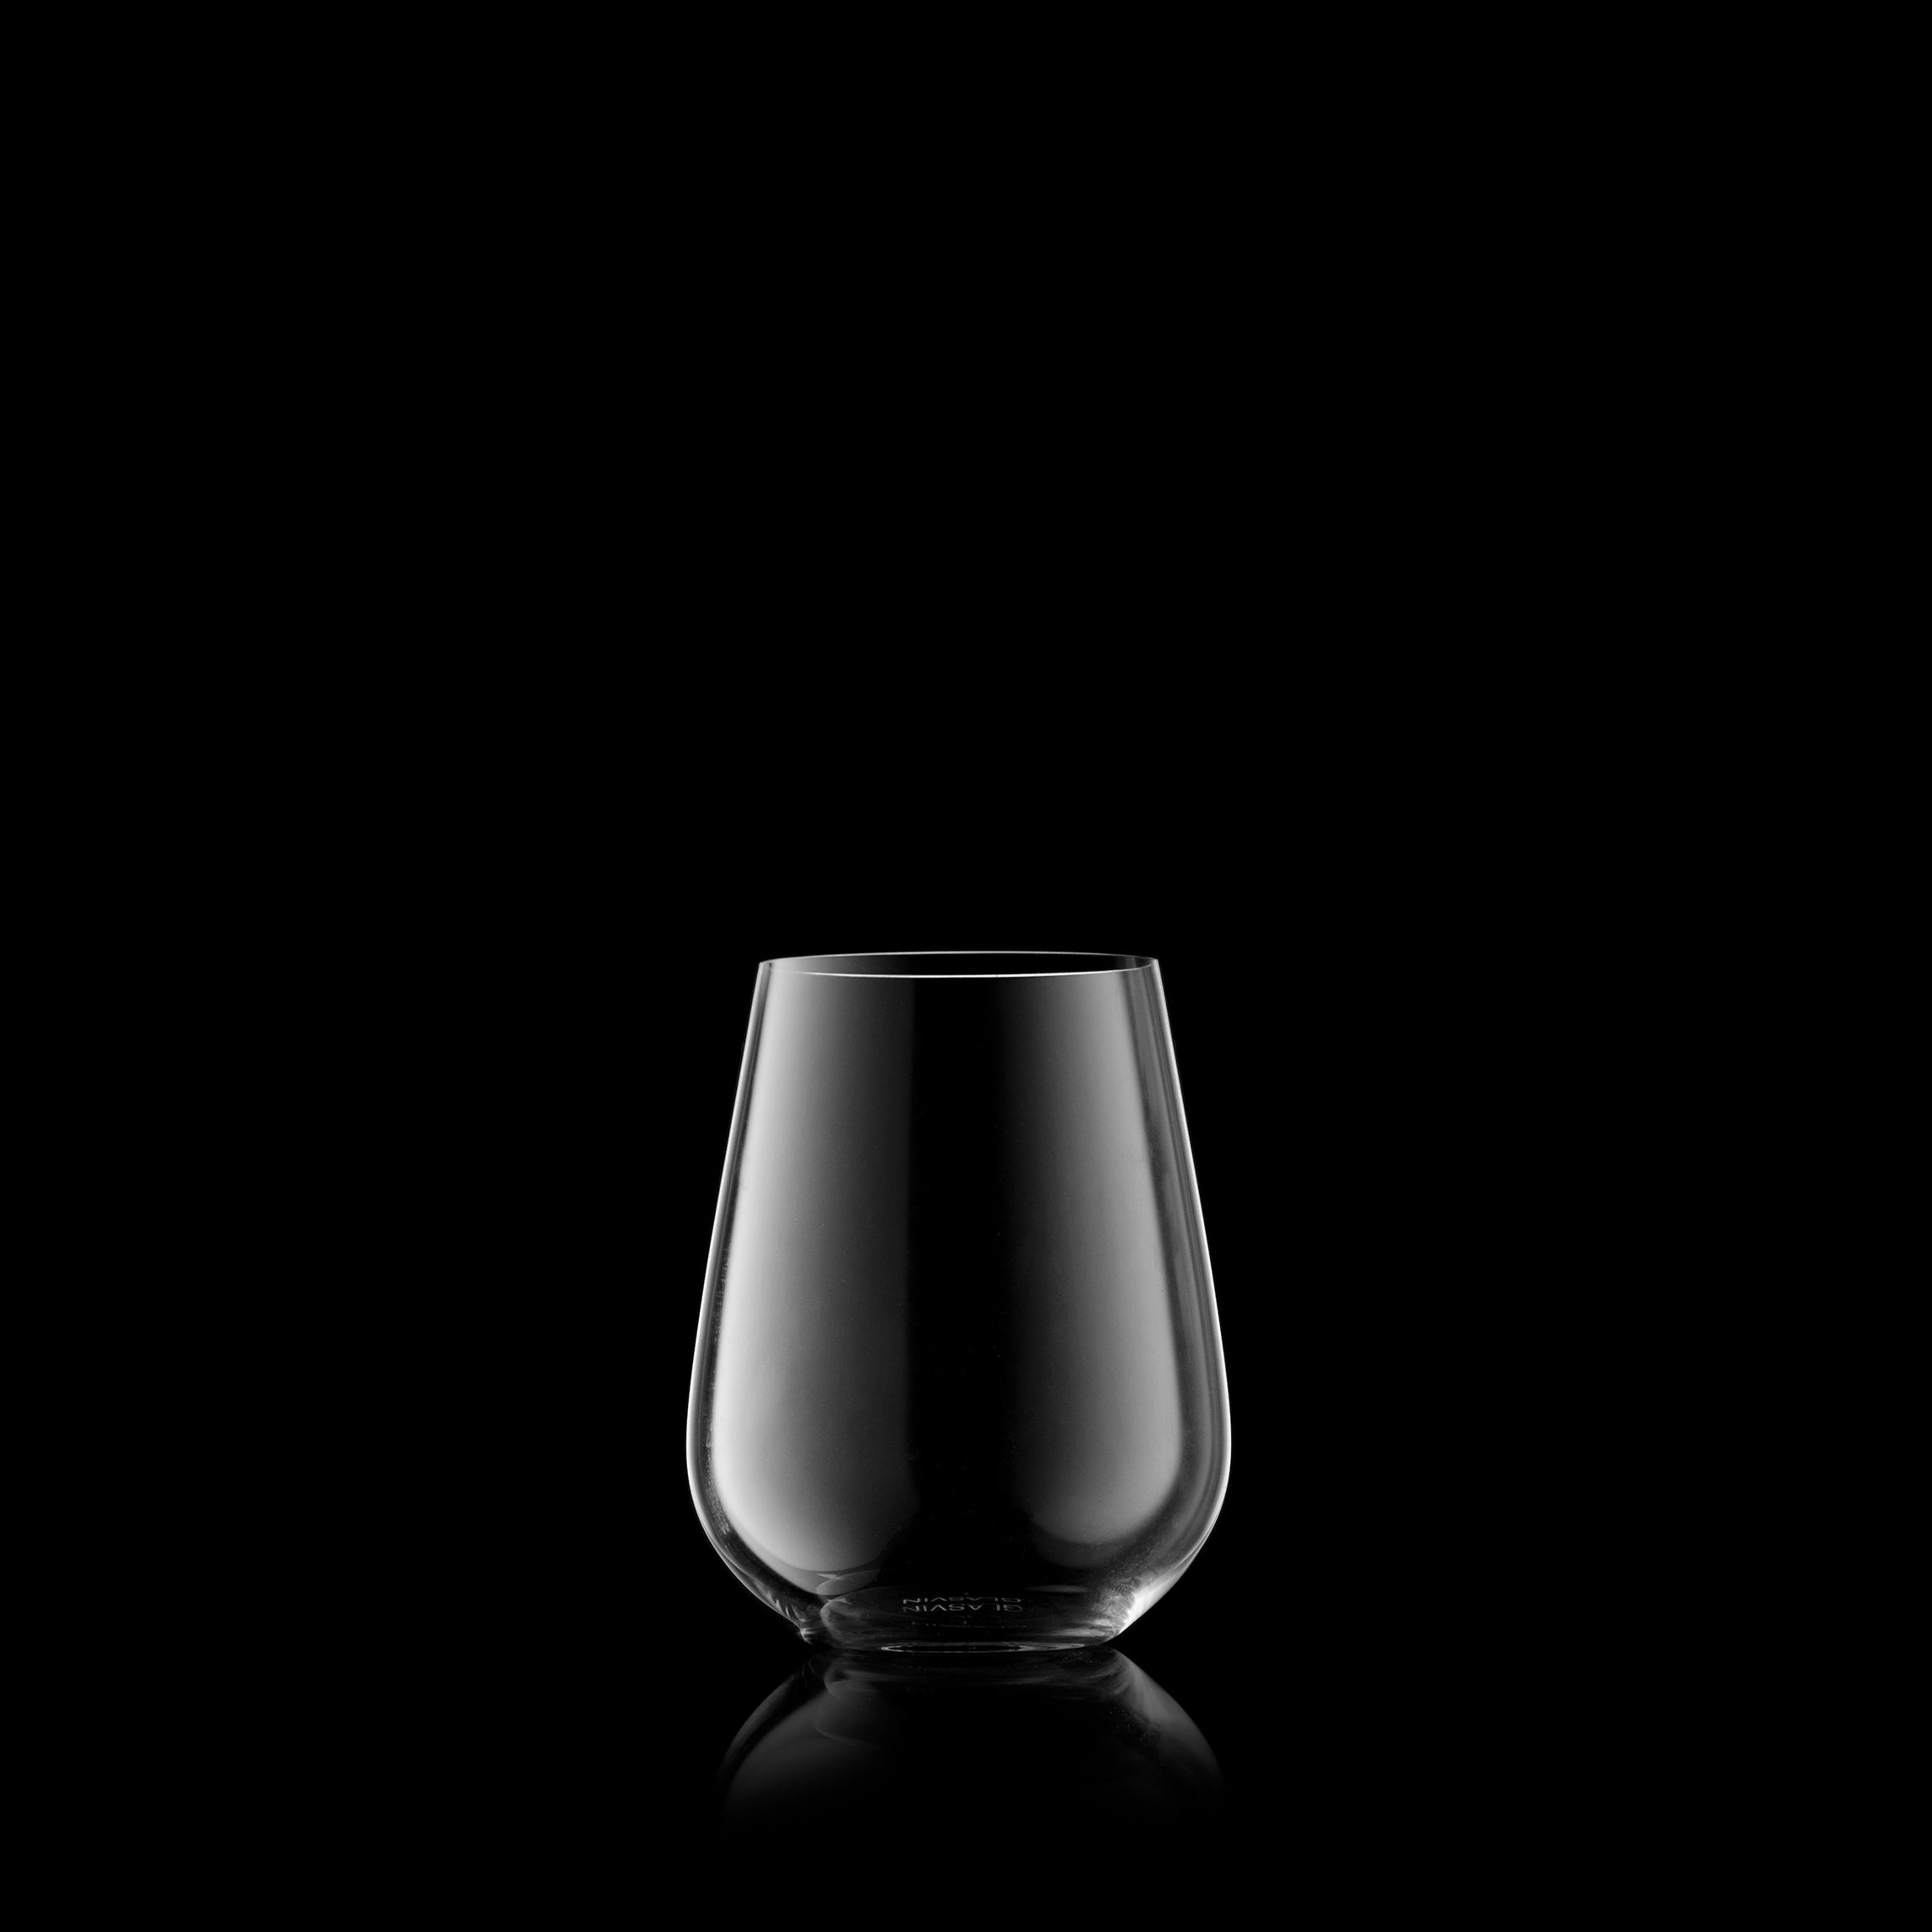 The Stemless